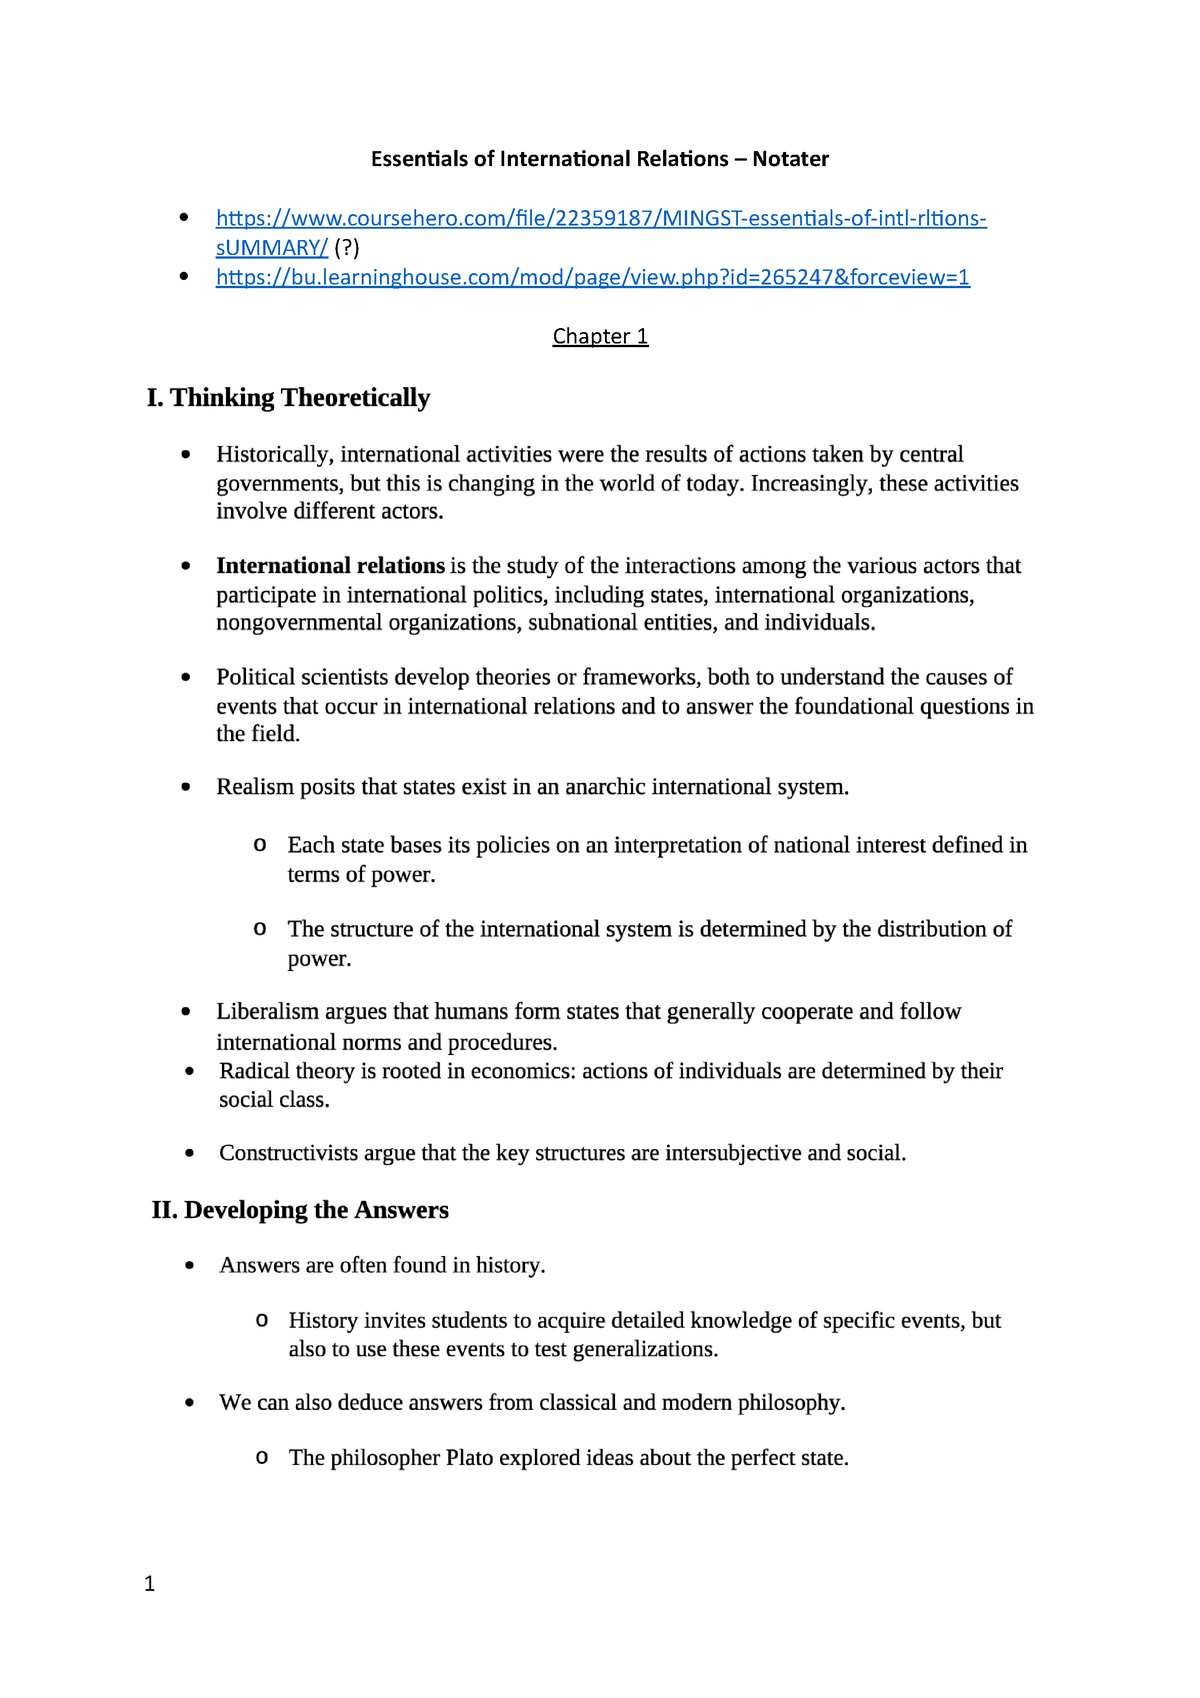 research proposal for international relations